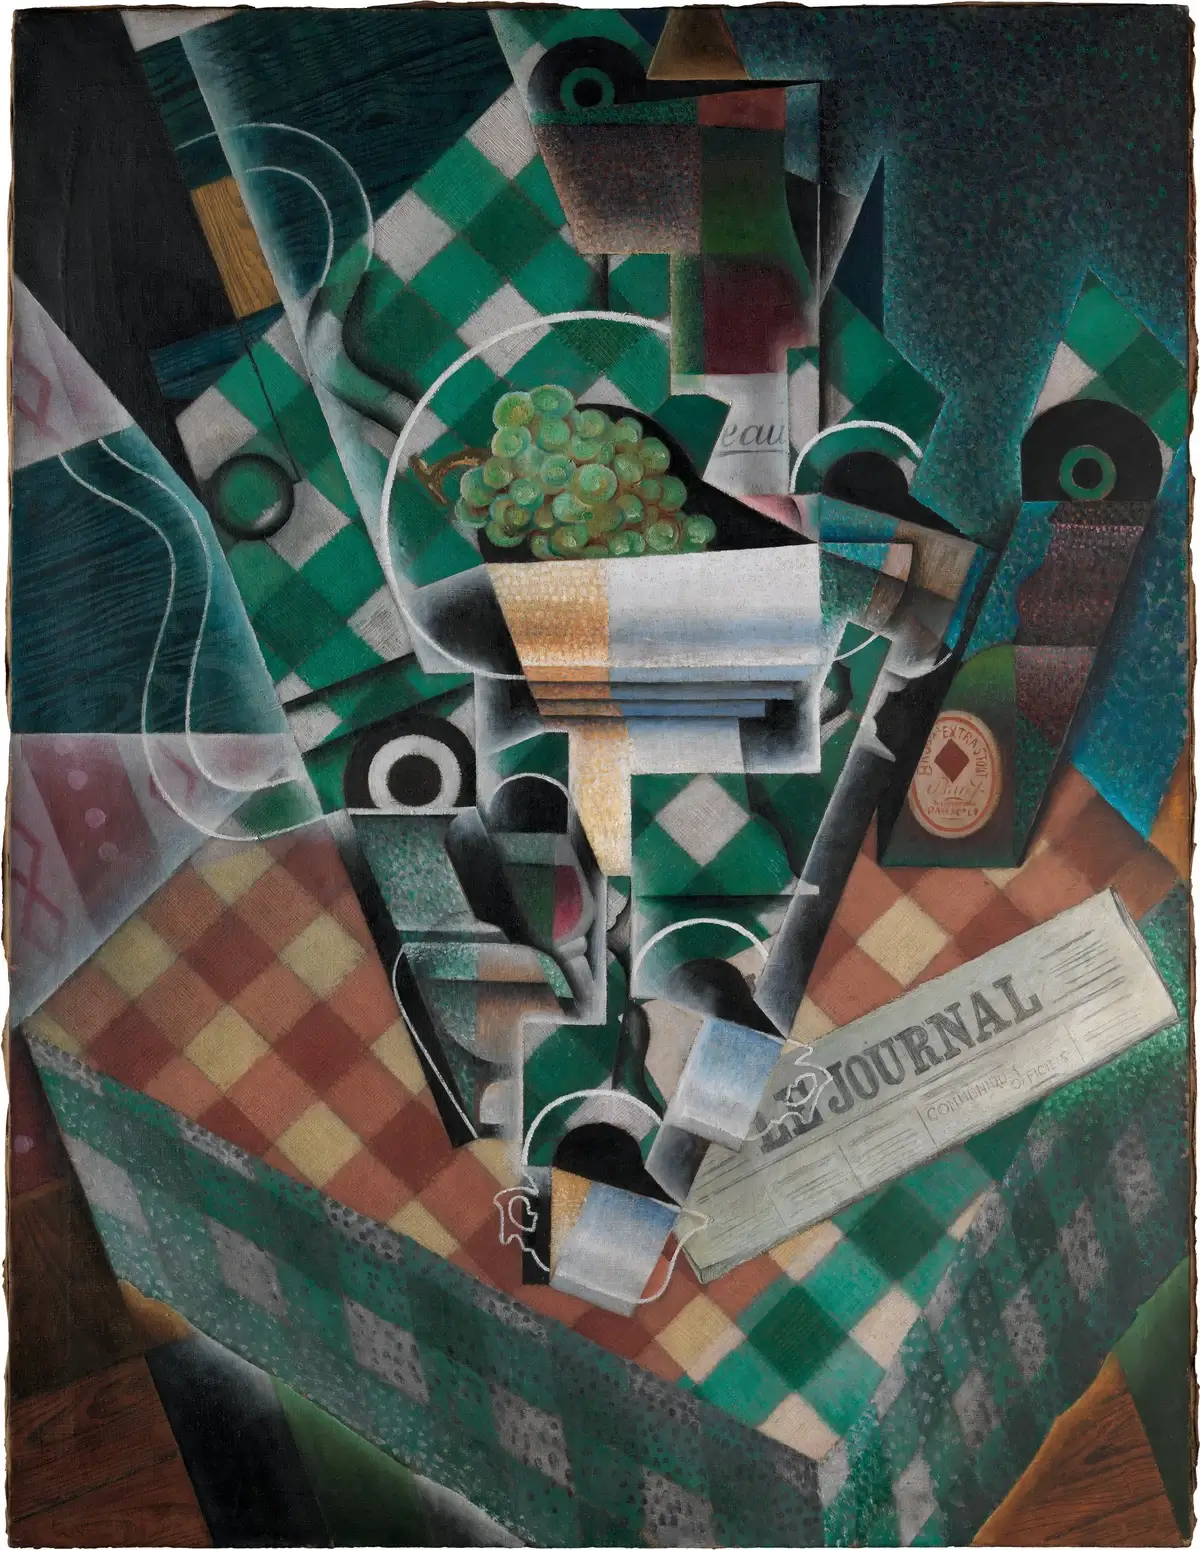 Juan Gris, “Still Life with Checked Tablecloth”, 1915